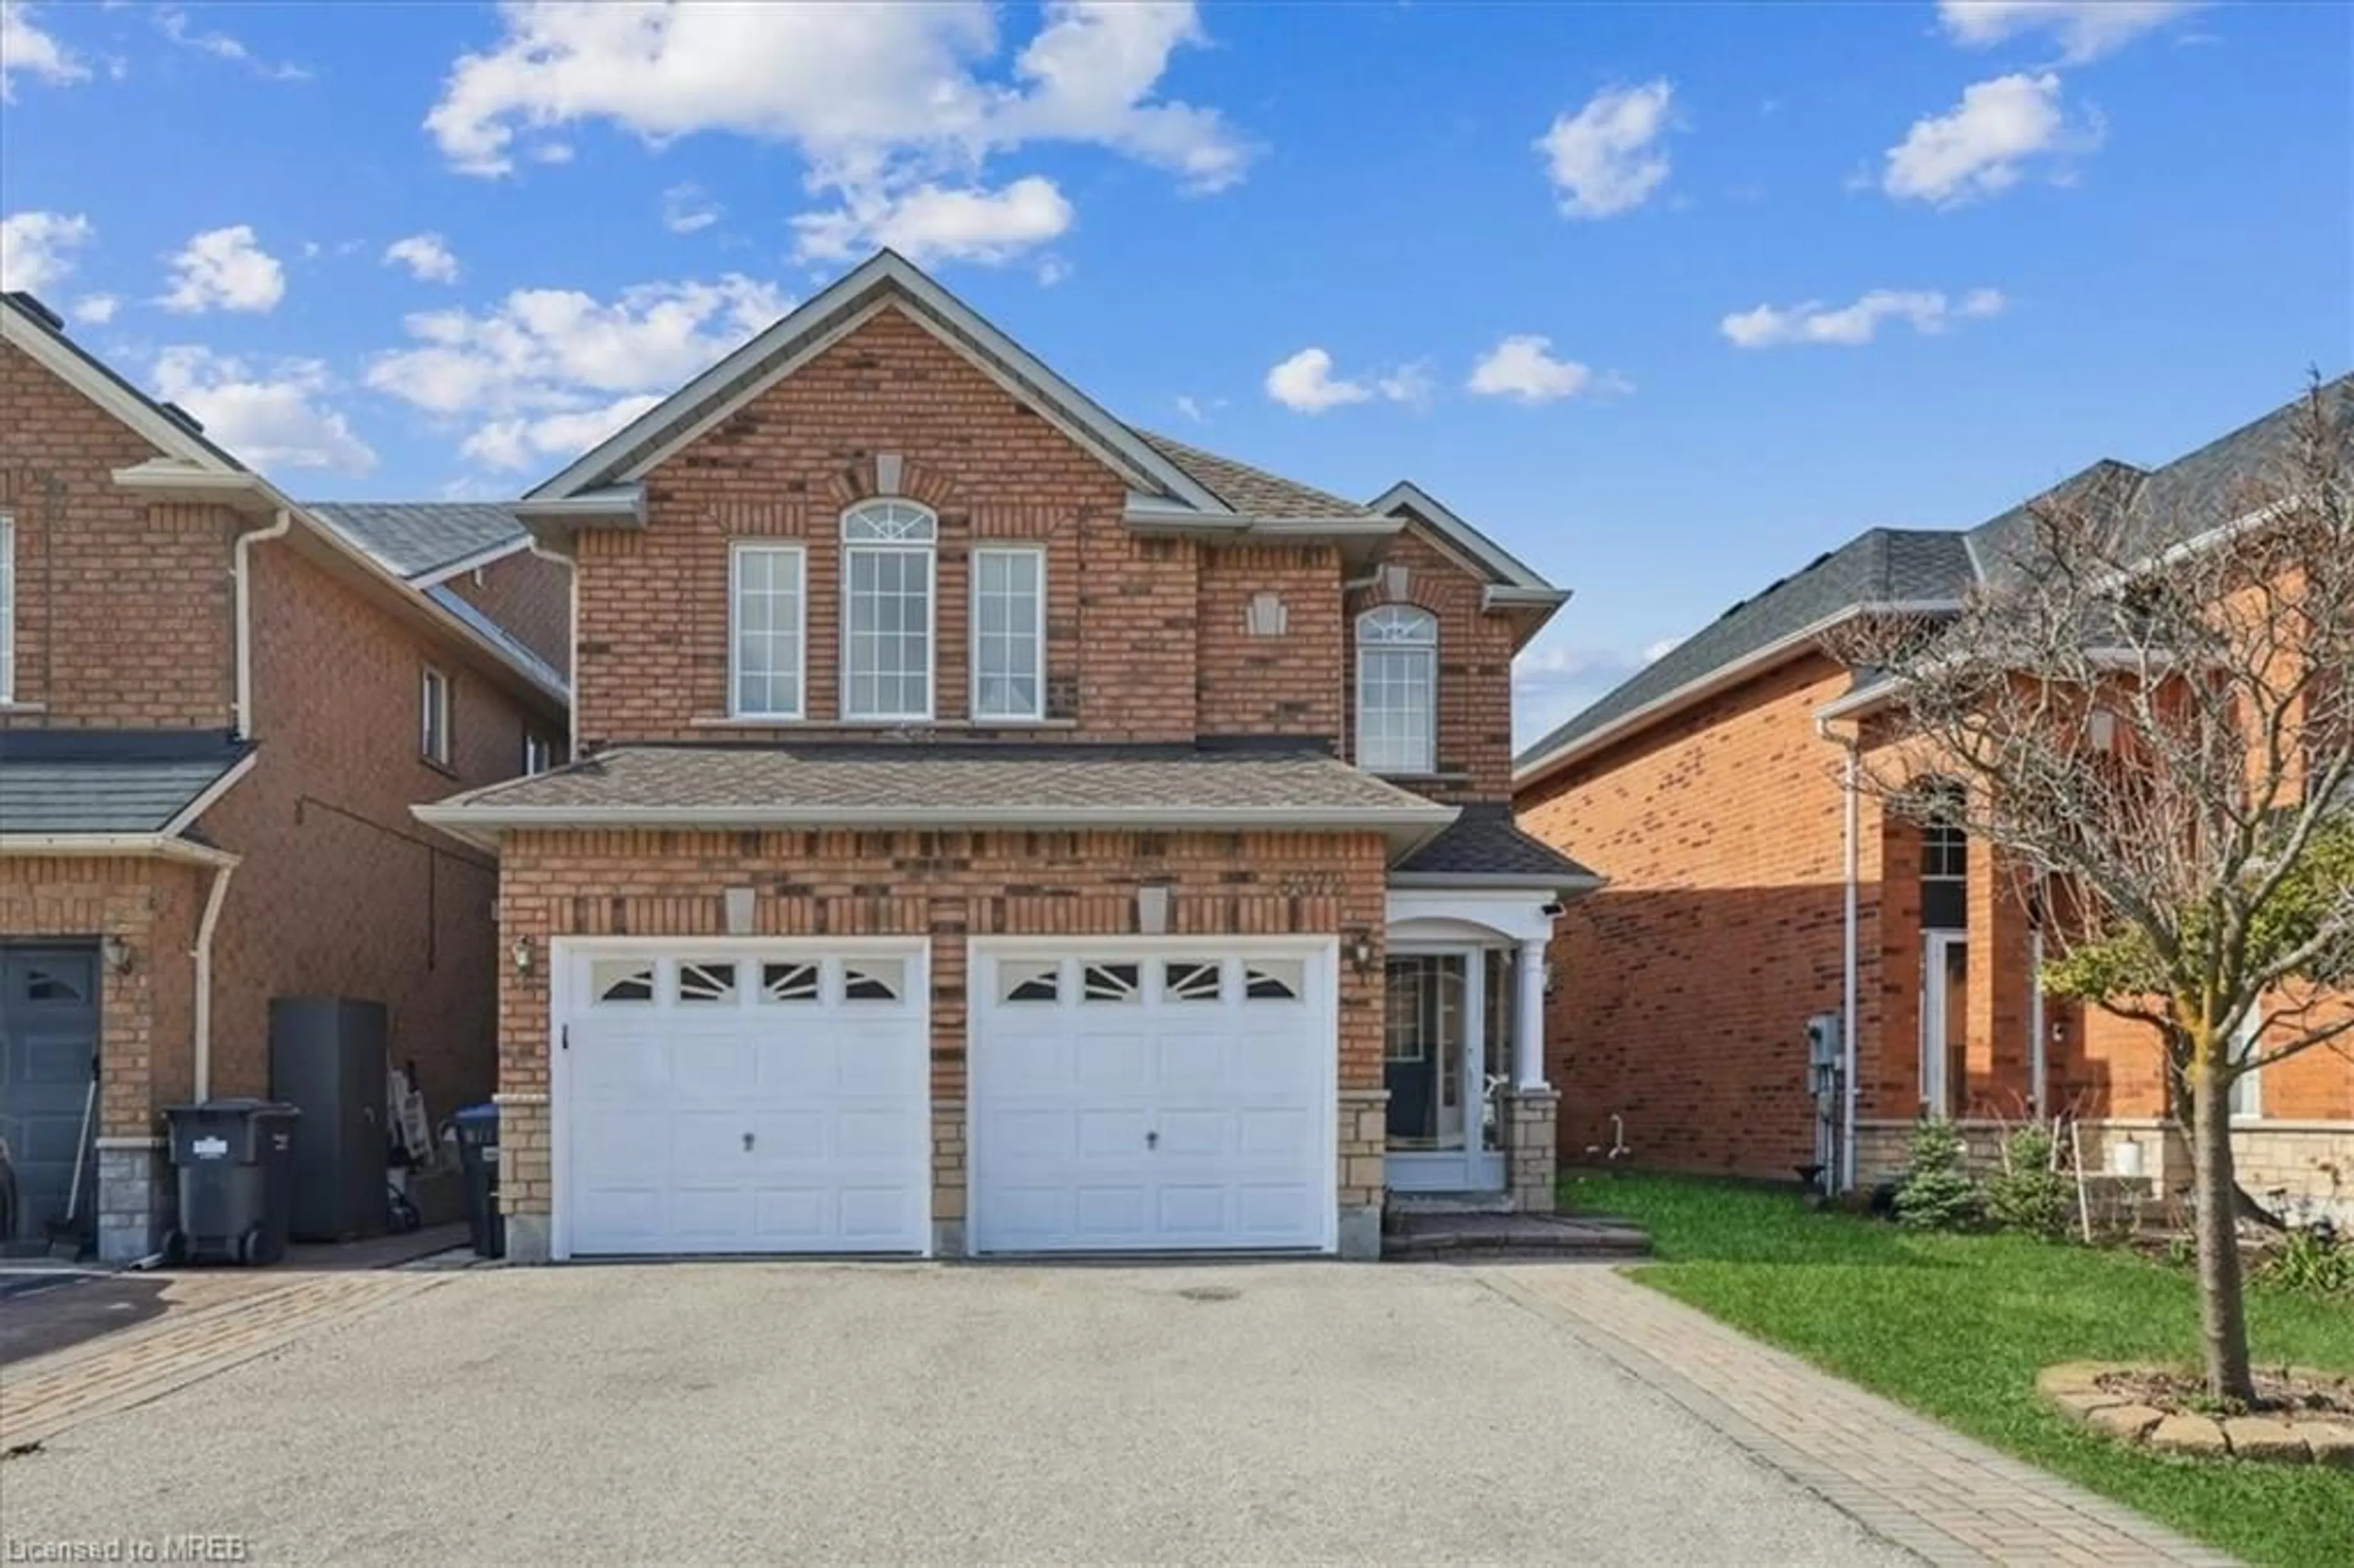 Home with brick exterior material for 5372 Hollypoint Ave, Mississauga Ontario L5V 2L3